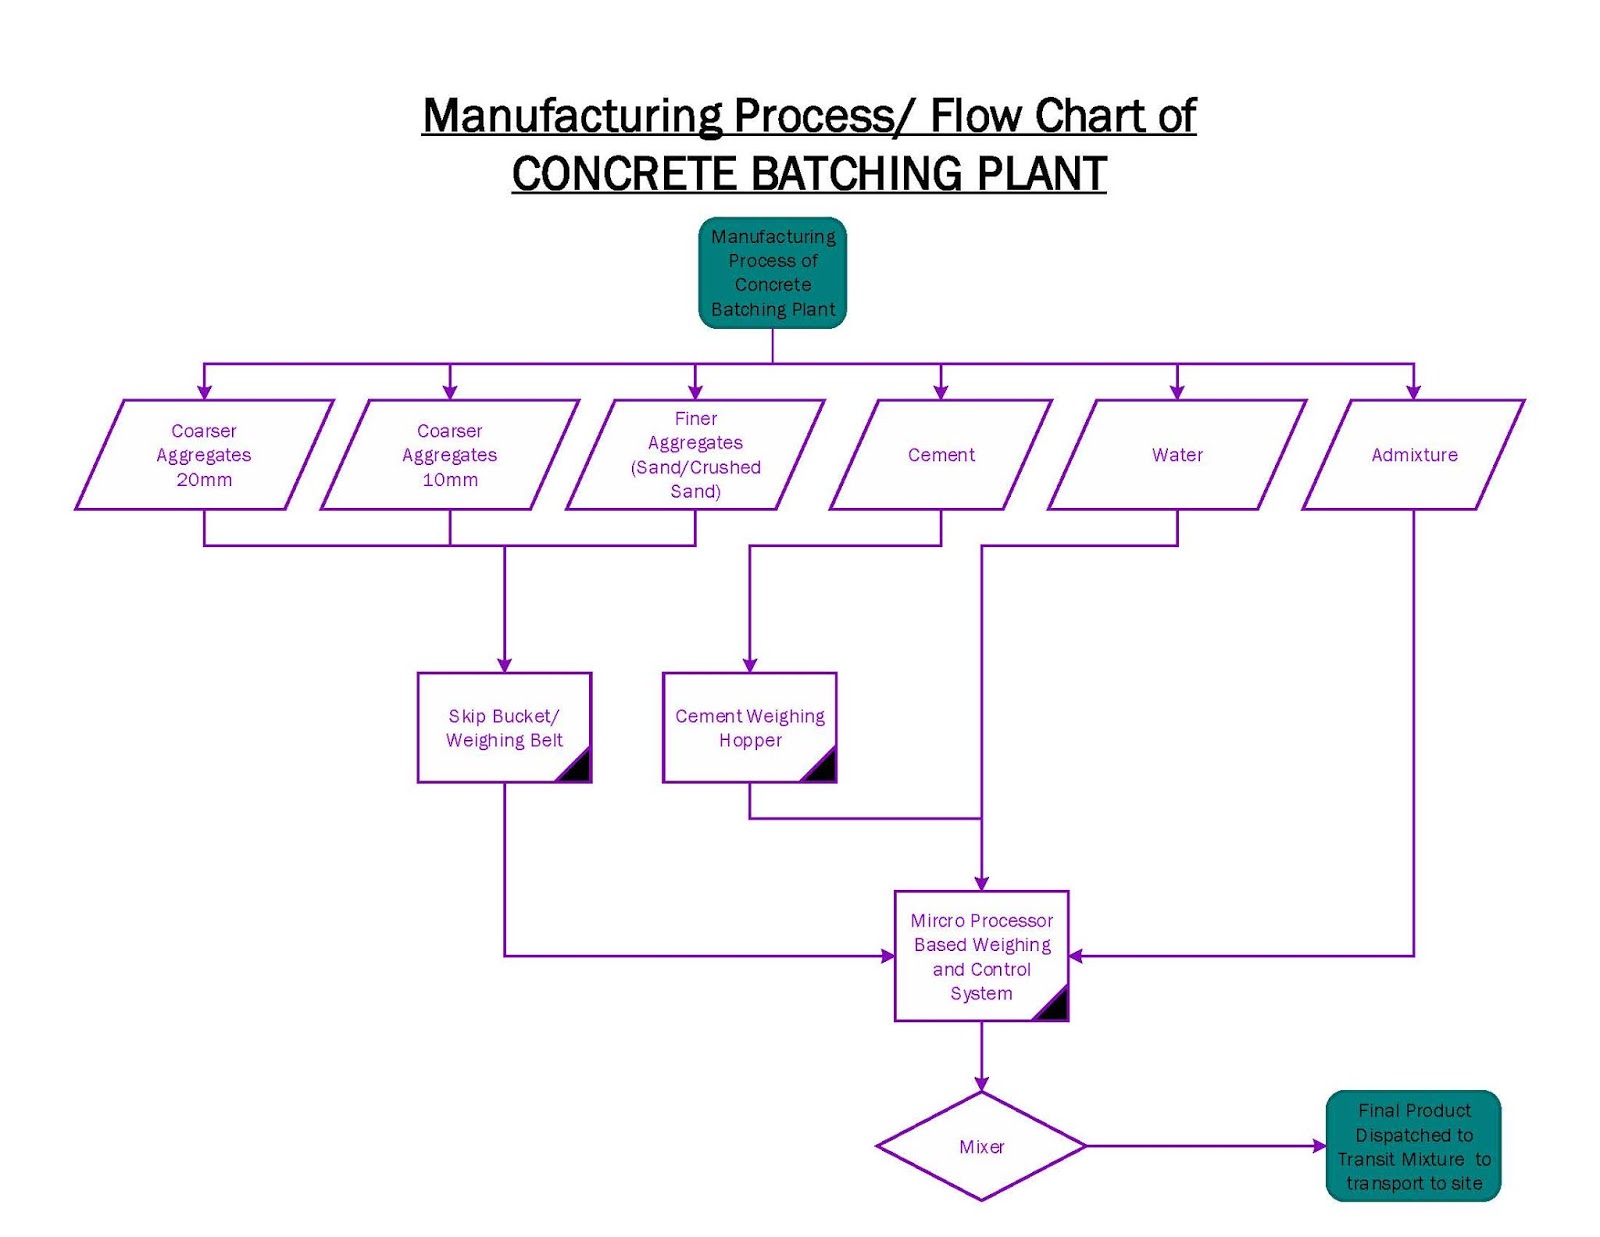 Works Space Manufacturing Process Flow Chart Of Concrete Batching Plant ...